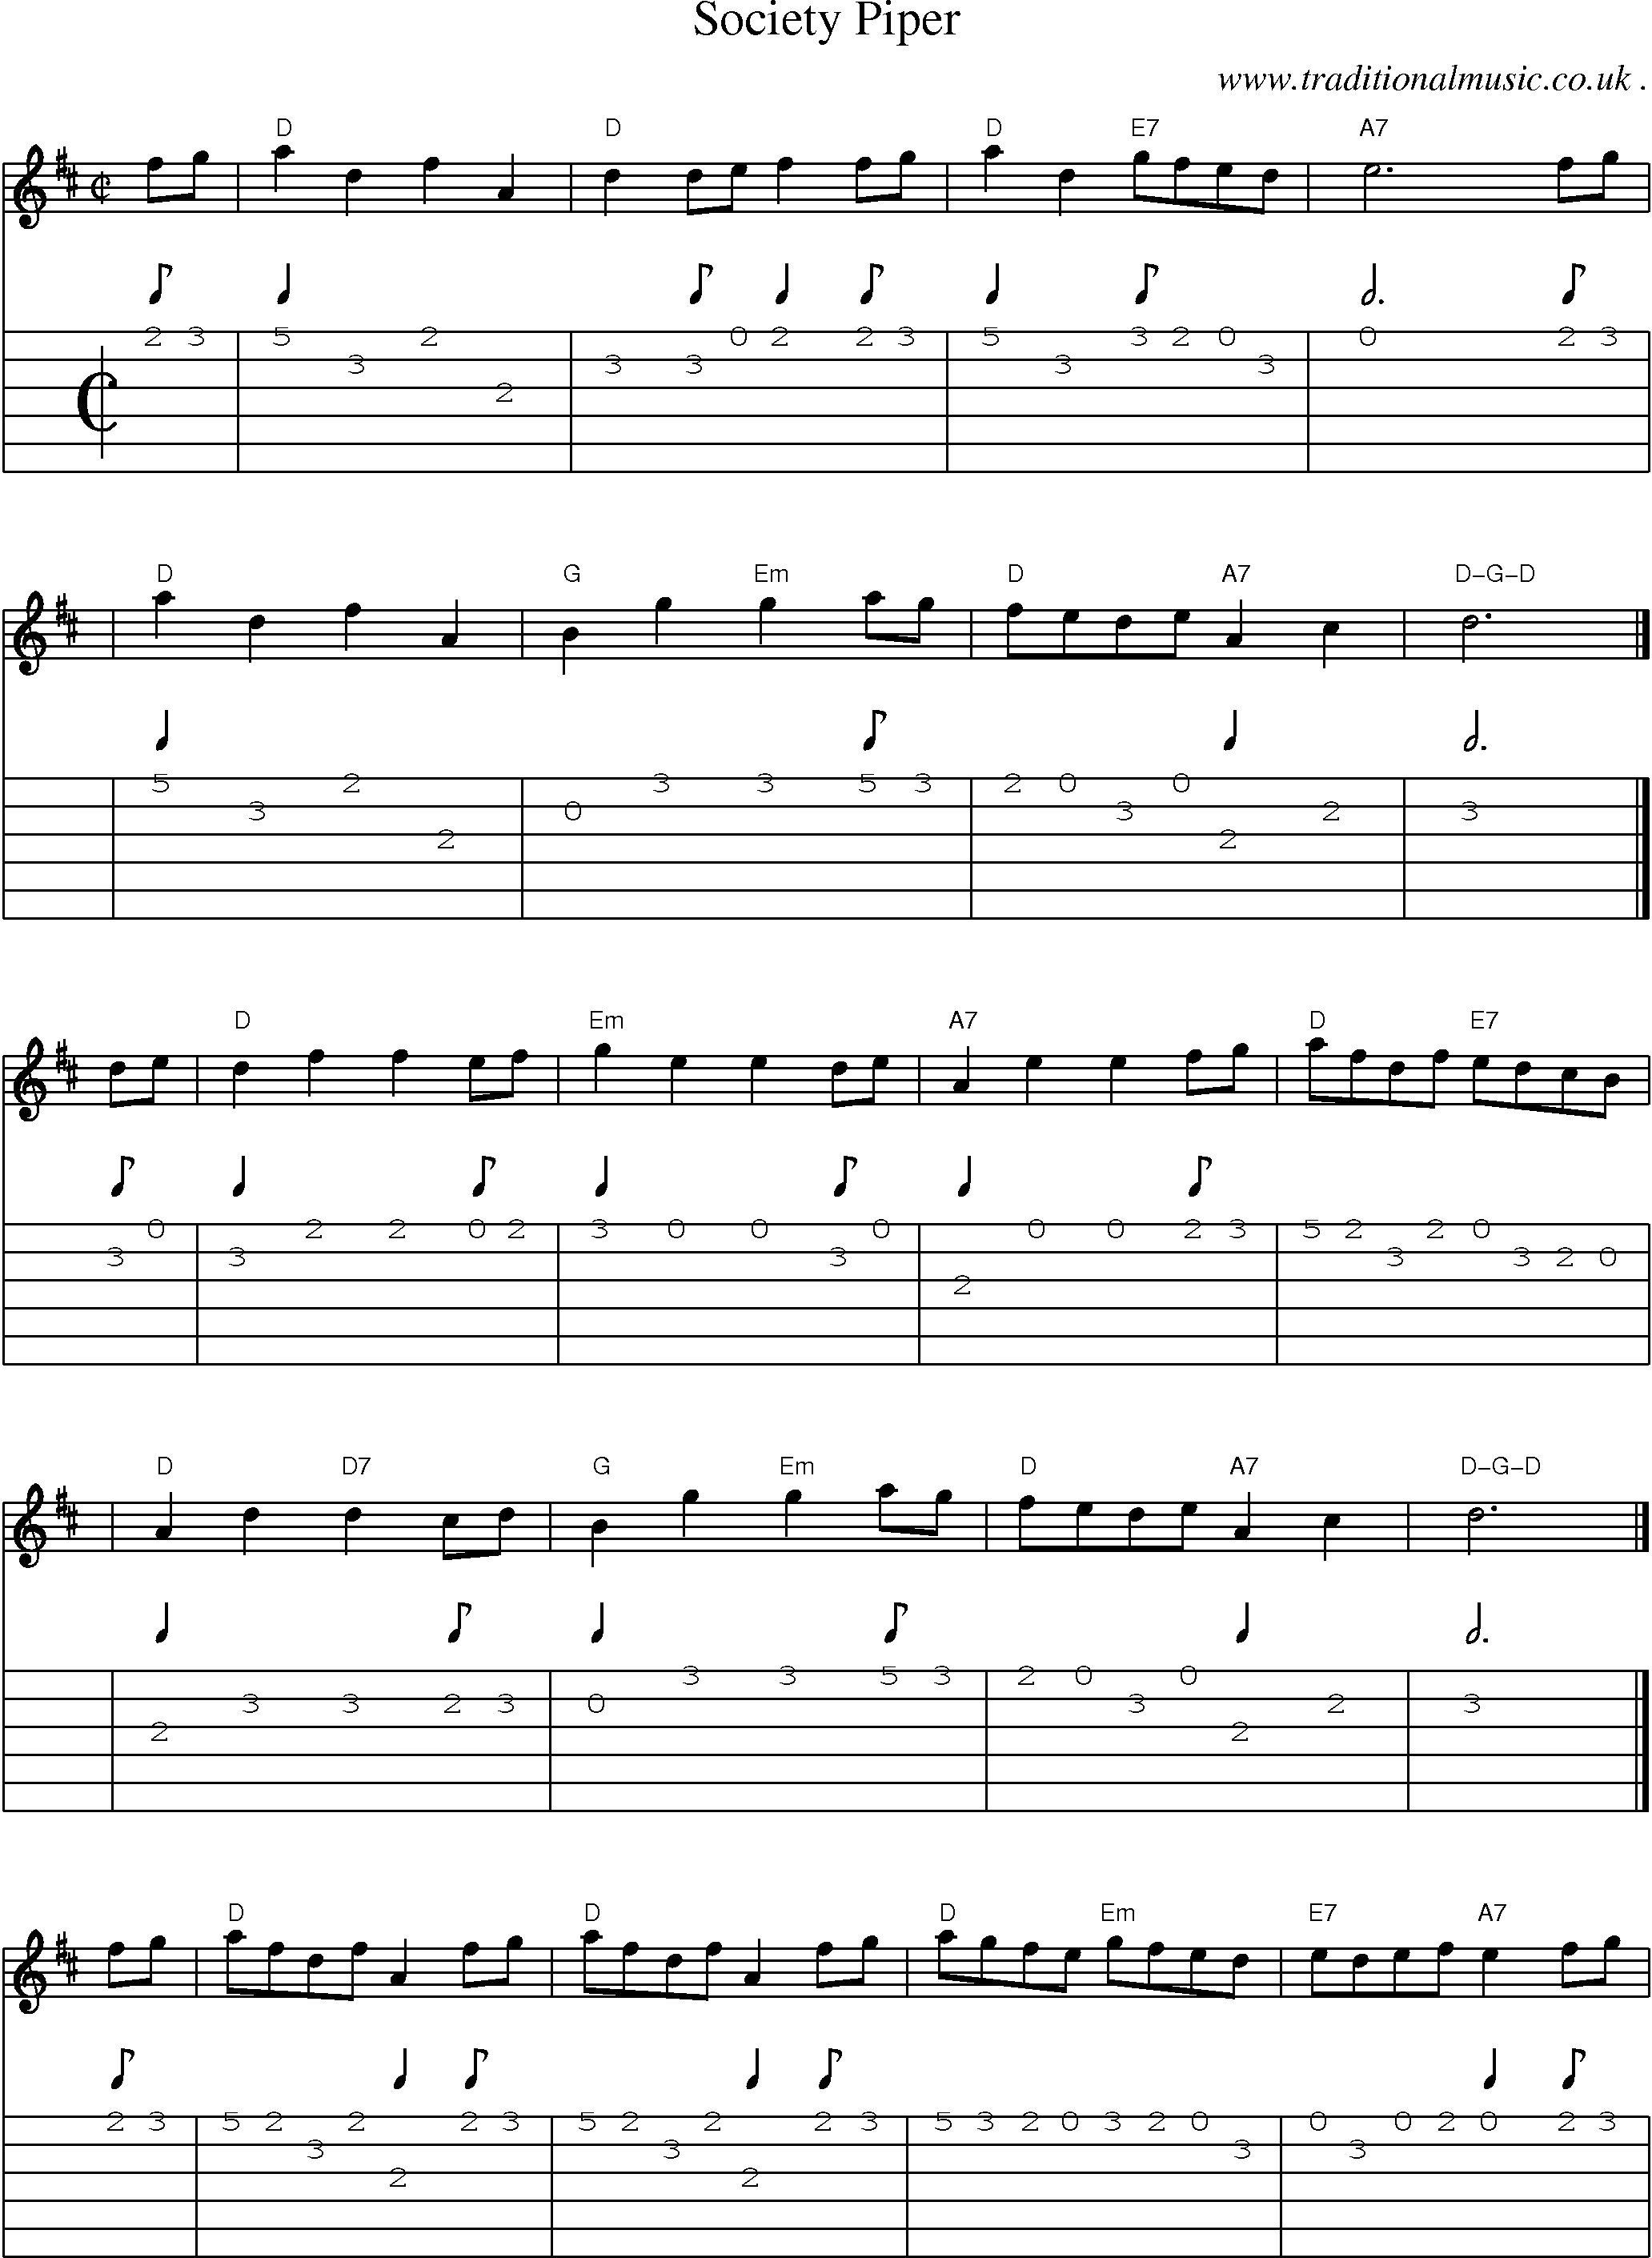 Sheet-music  score, Chords and Guitar Tabs for Society Piper